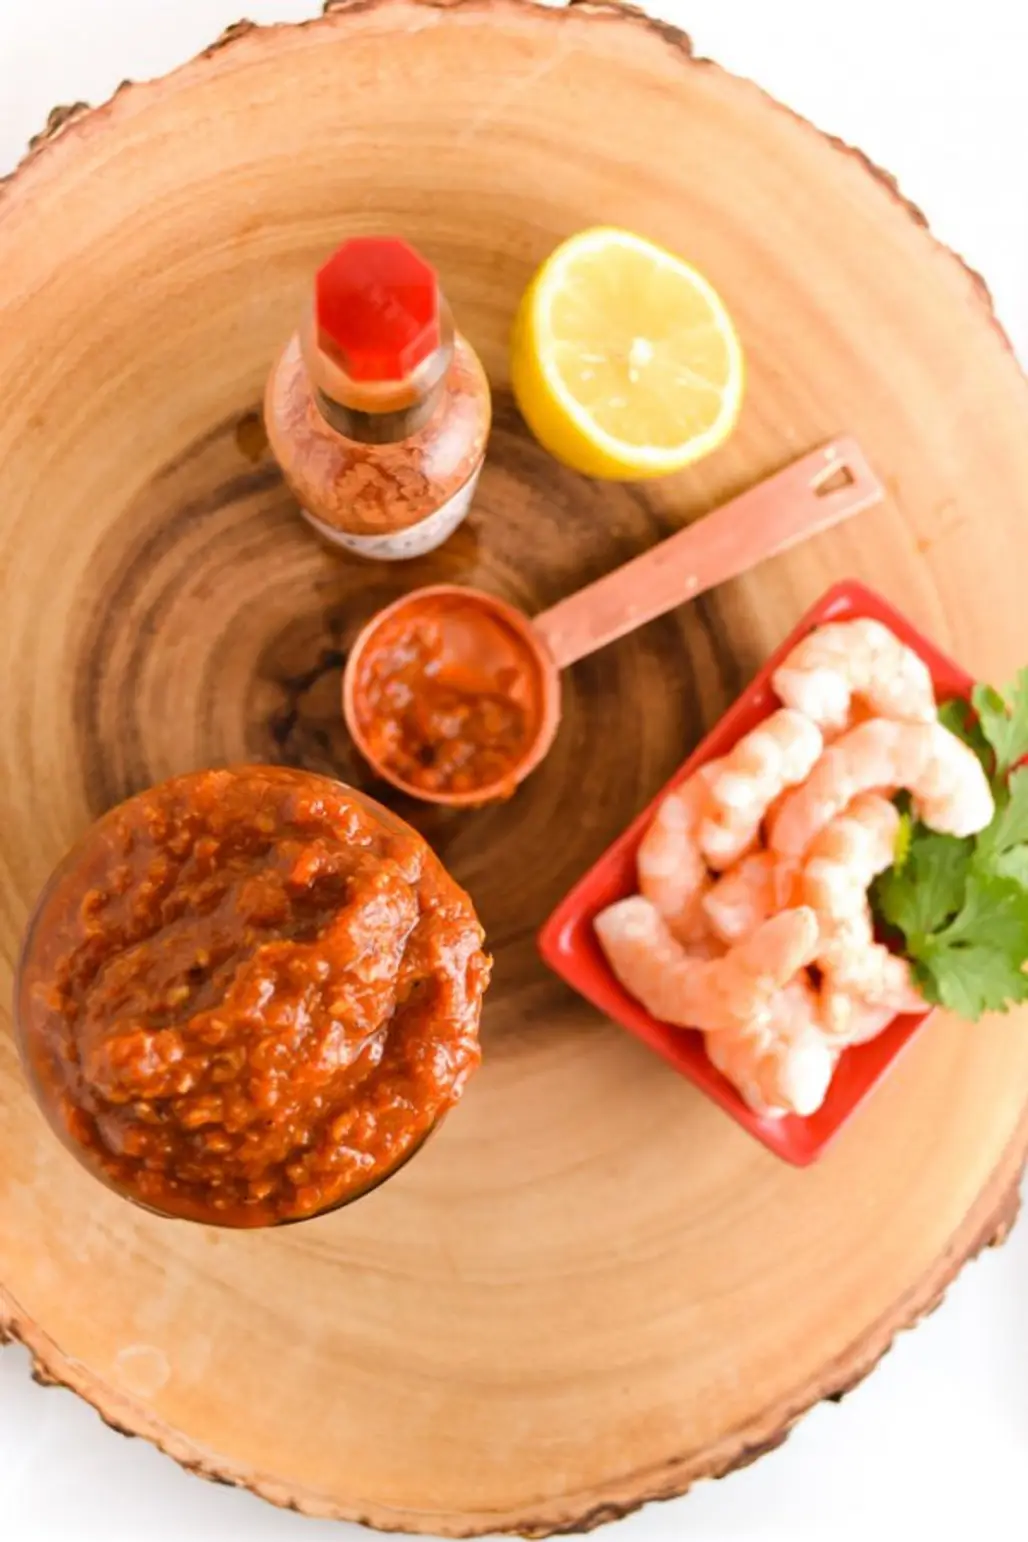 Mix up Some Spicy Authentic Cocktail Sauce